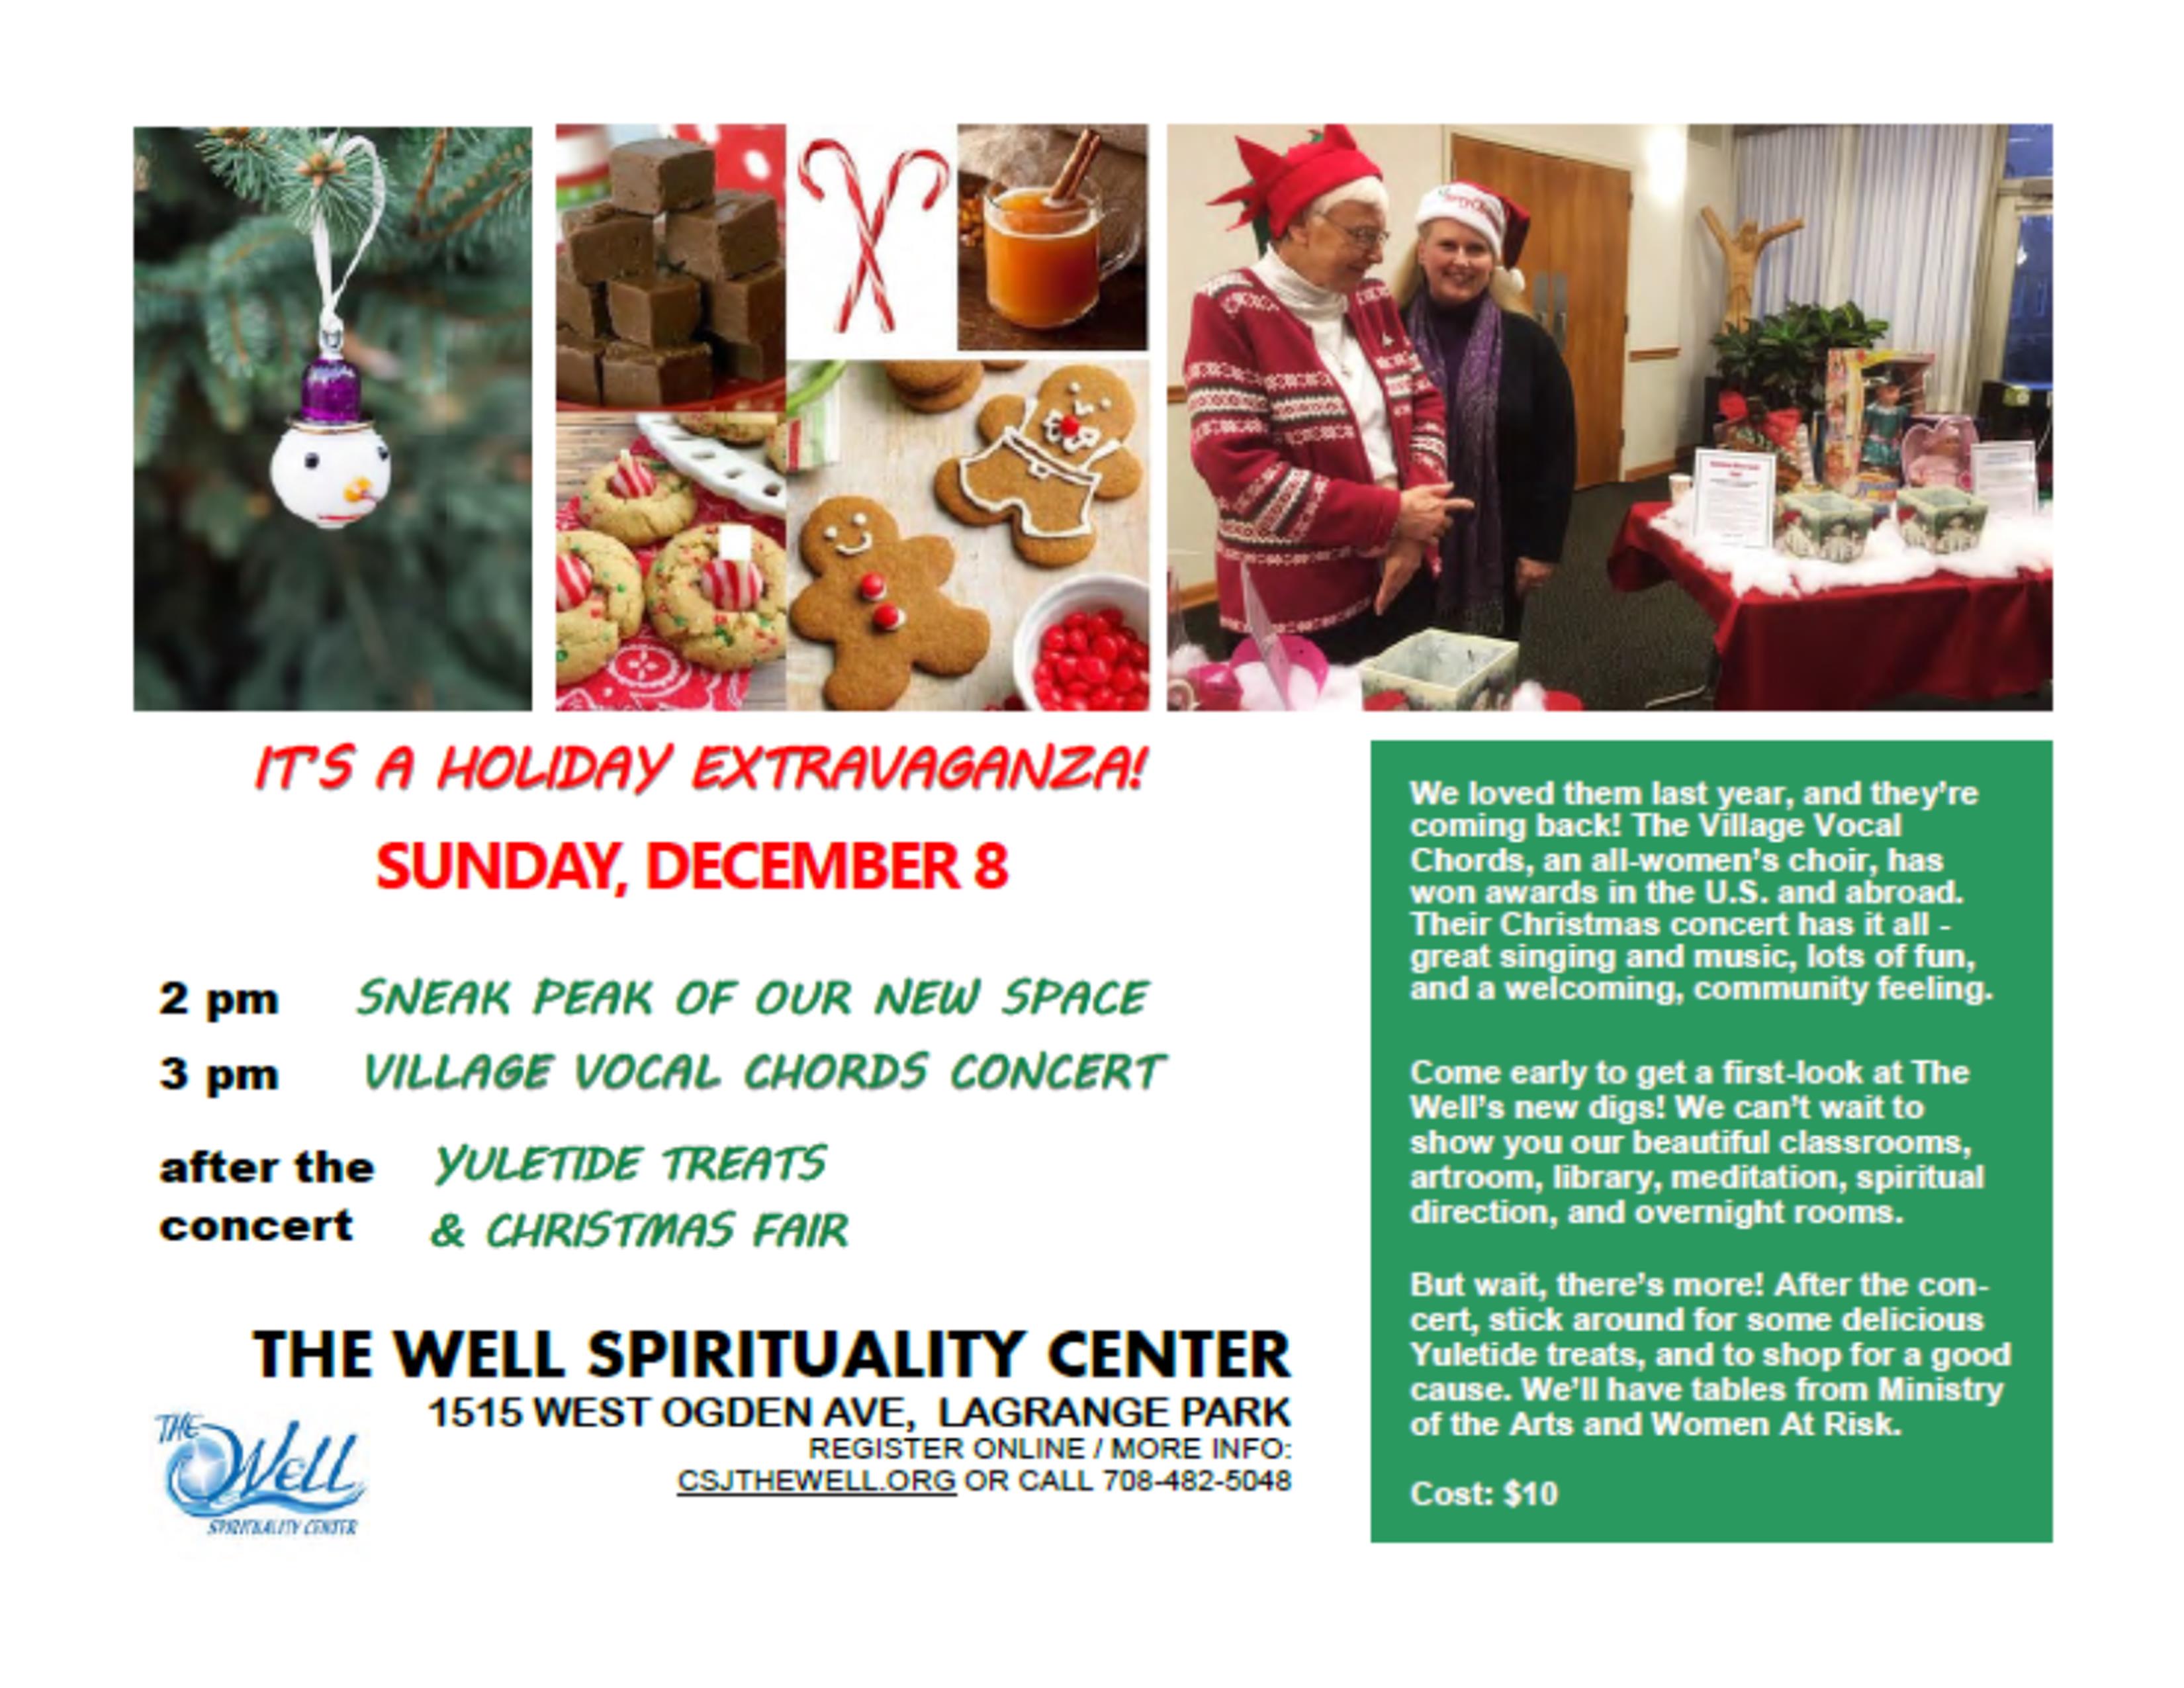 Christmas concert at the Well Spirituality Center in LaGrange